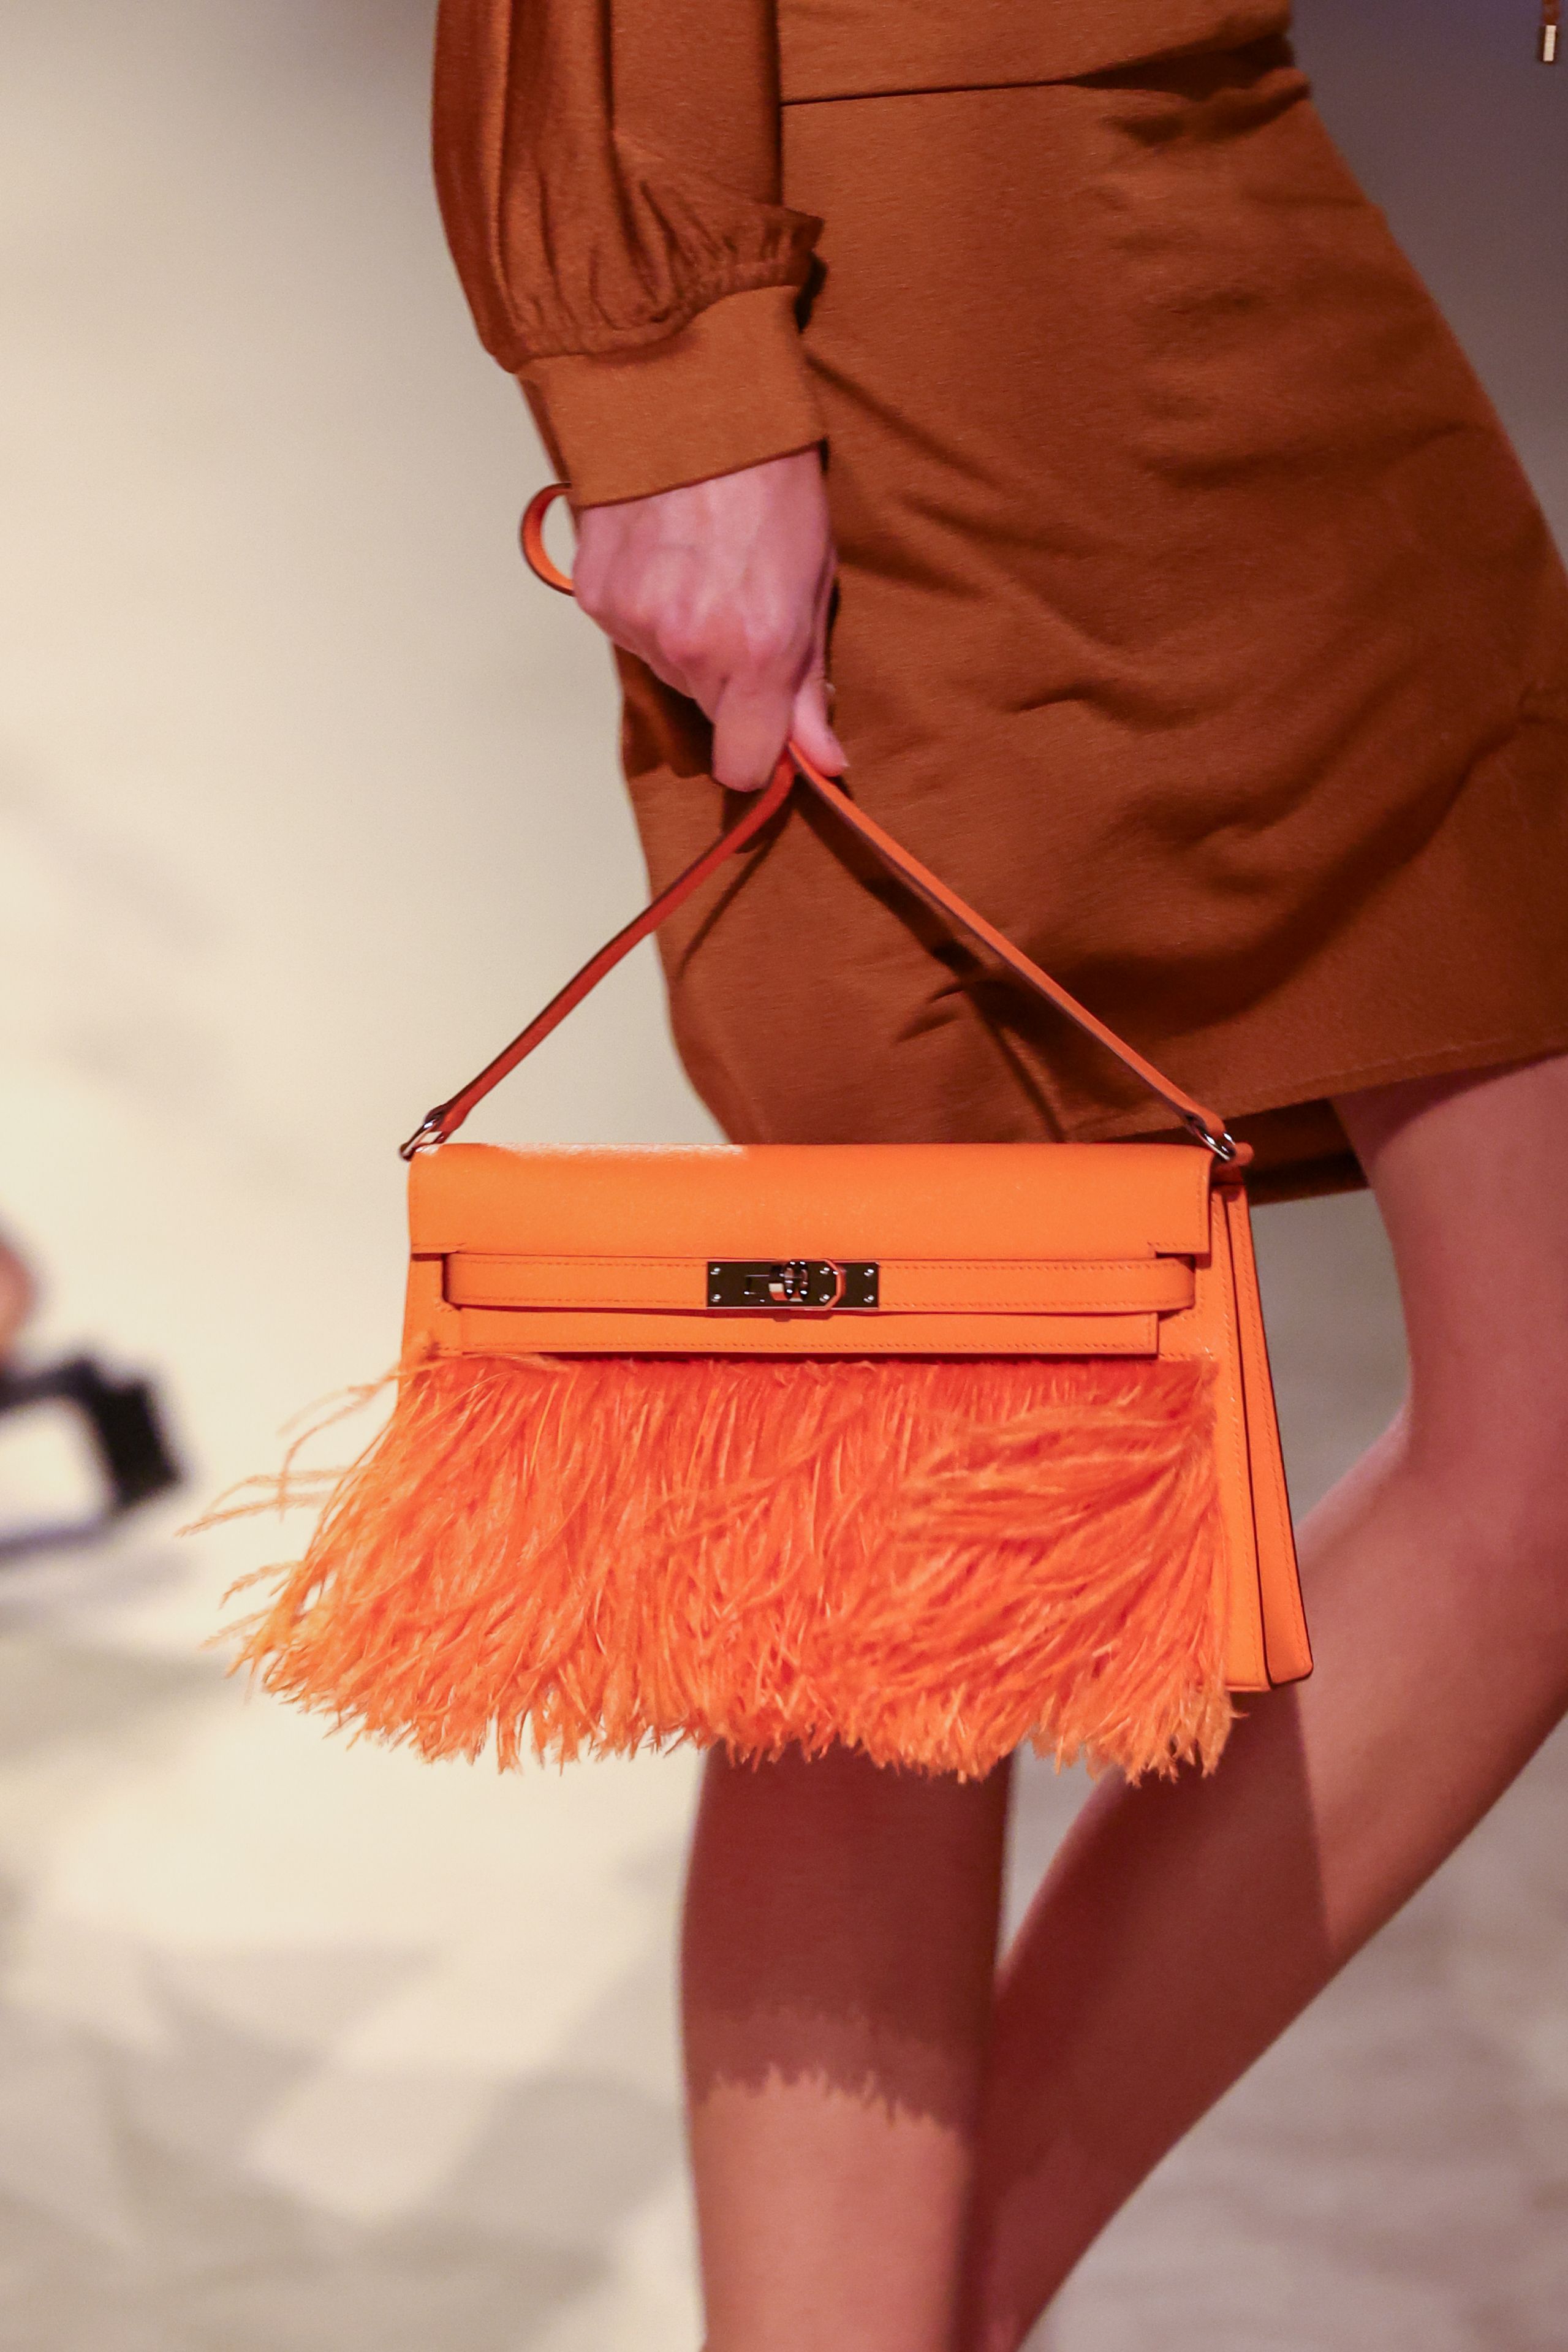 10 Best 2023 Bag Trends — Best Bags to Shop for 2023